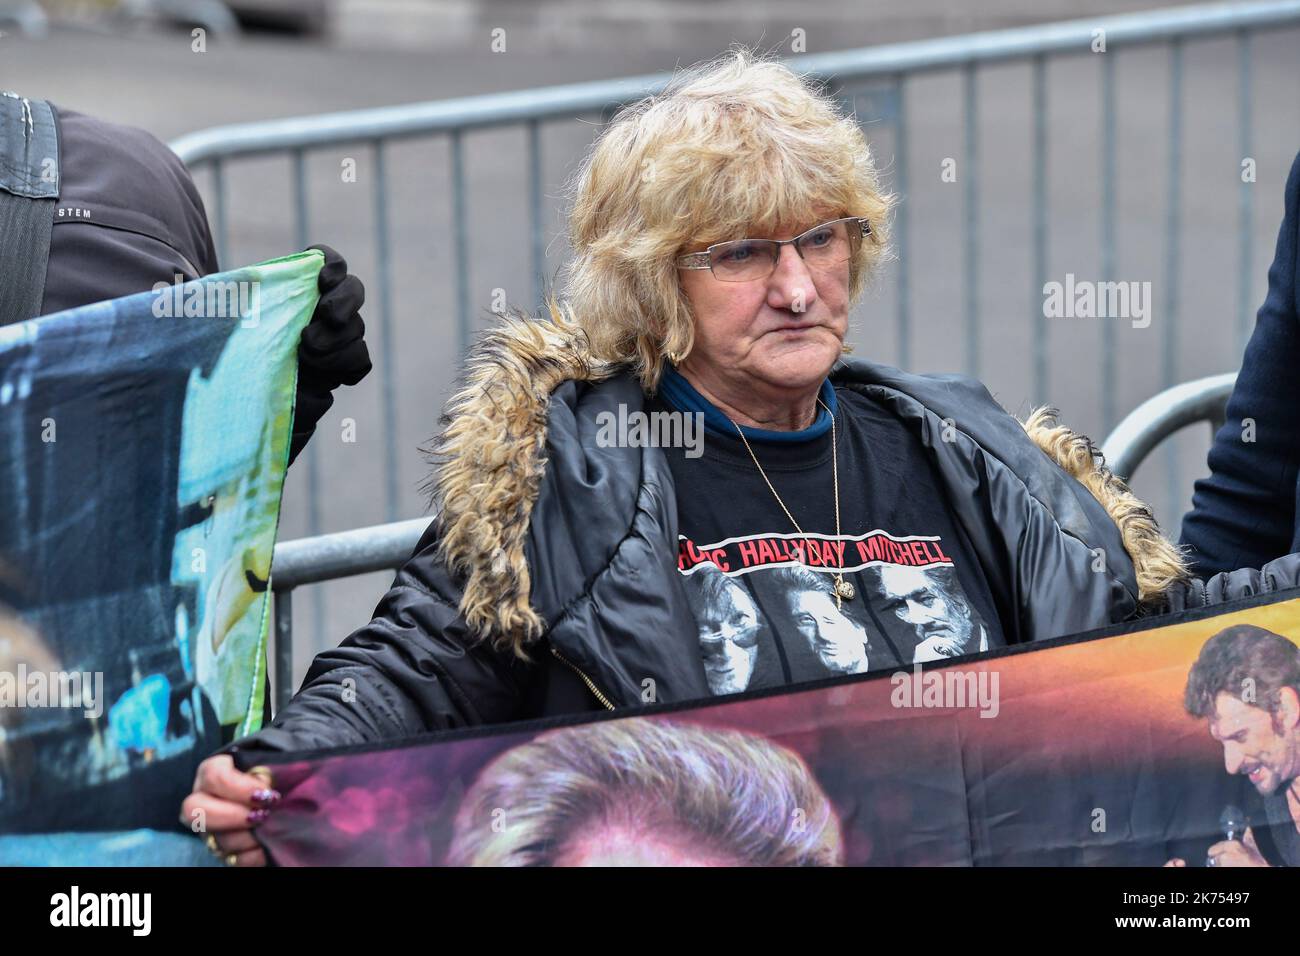 Fans of French singer and actor Johnny Hallyday and journalists gather near the house of Johnny Hallyday, in Marnes-la-Coquette on December 6, 2017 Stock Photo